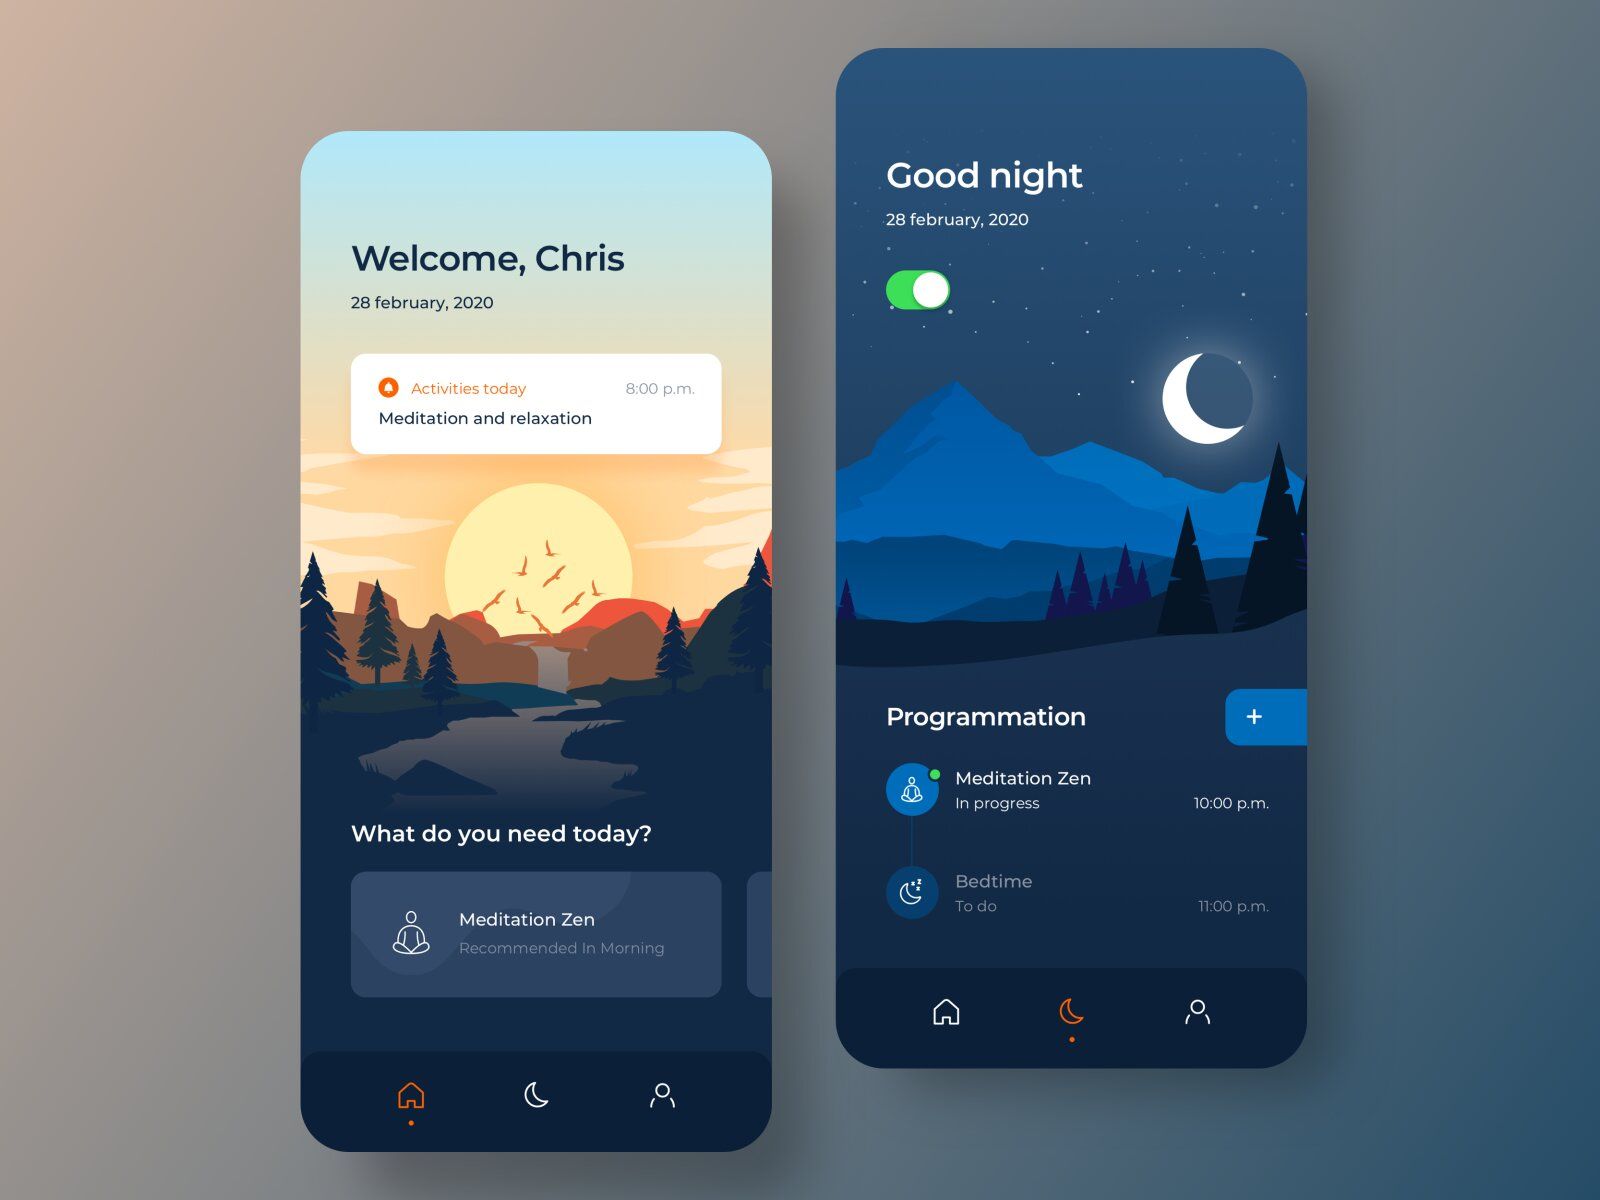 Mindfulness app can also contribute to a healthy lifestyle (*image by [Angel Villanueva](https://dribbble.com/sogaso){ rel="nofollow" target="_blank" .default-md}*)